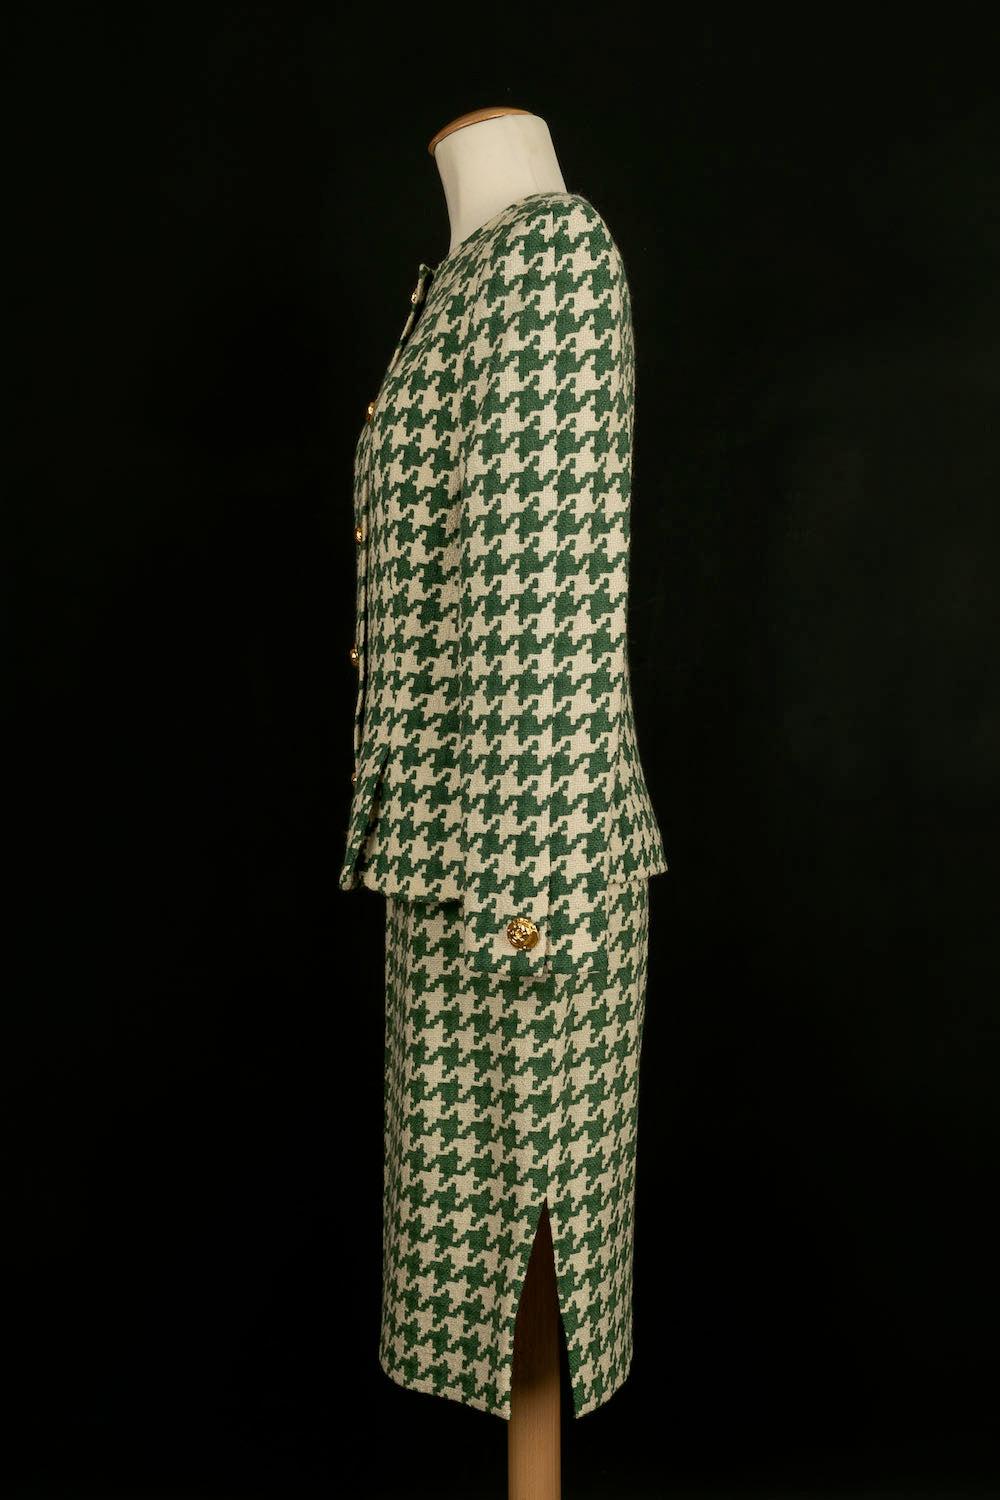 Women's Nina Ricci Woolen Outfit with Green Houndstooth Pattern For Sale